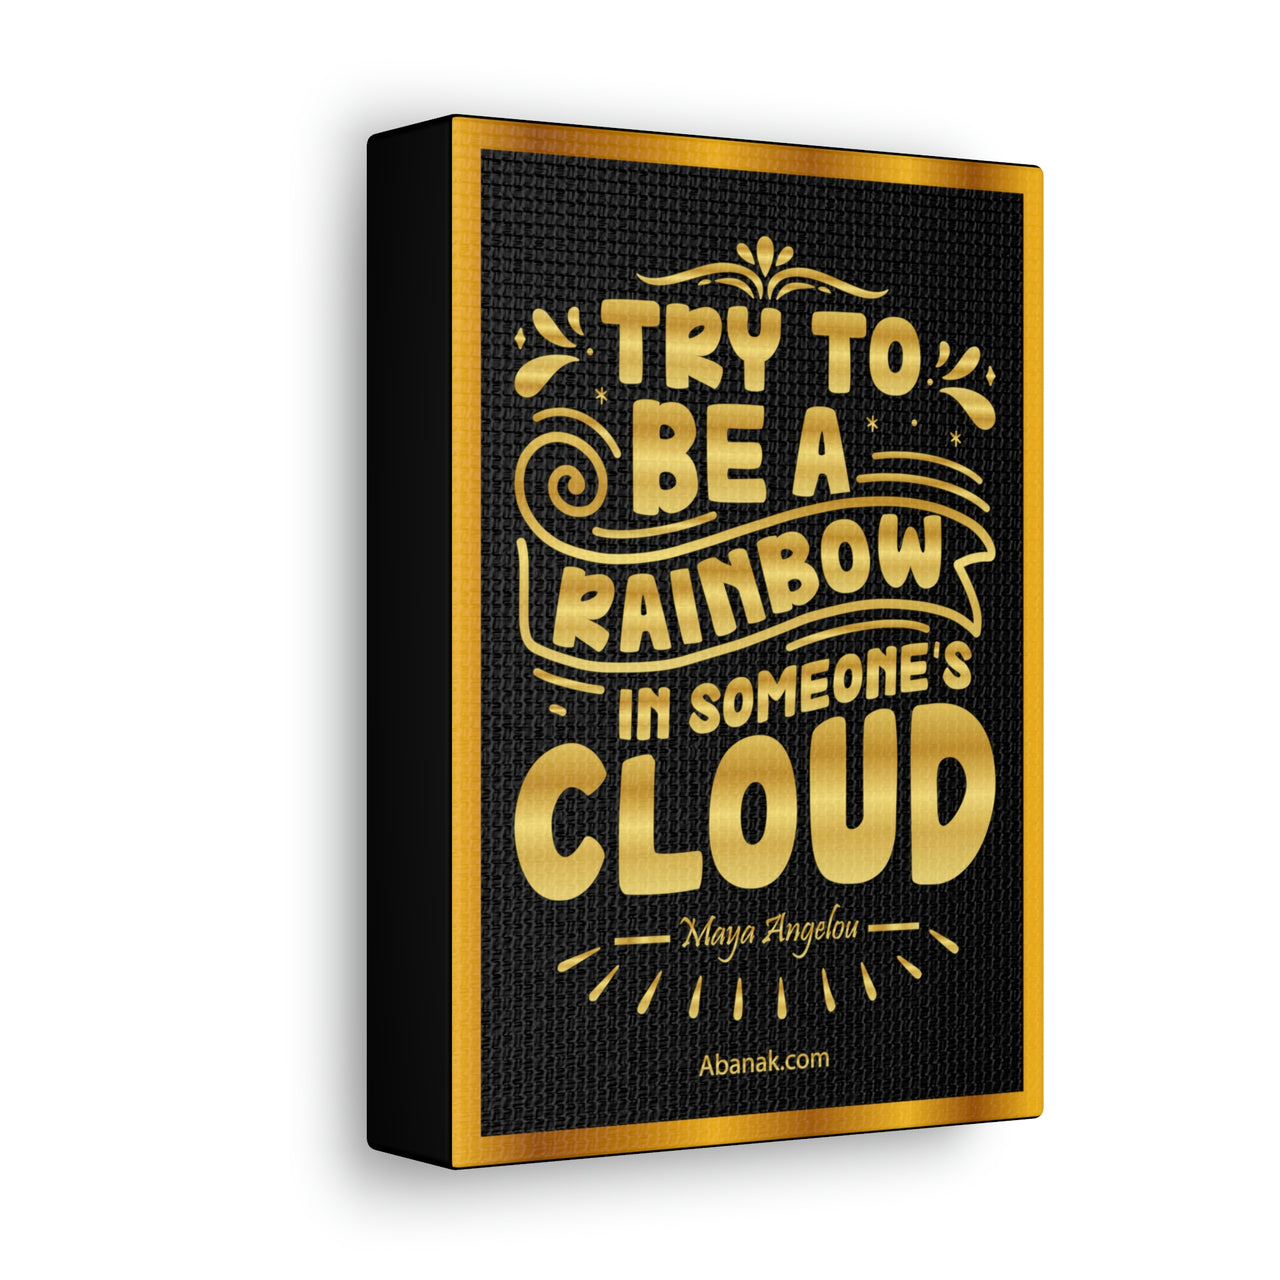 Be a Rainbow in Someone's Cloud - Maya Angelou - Gallery Wrapped Canvas Print